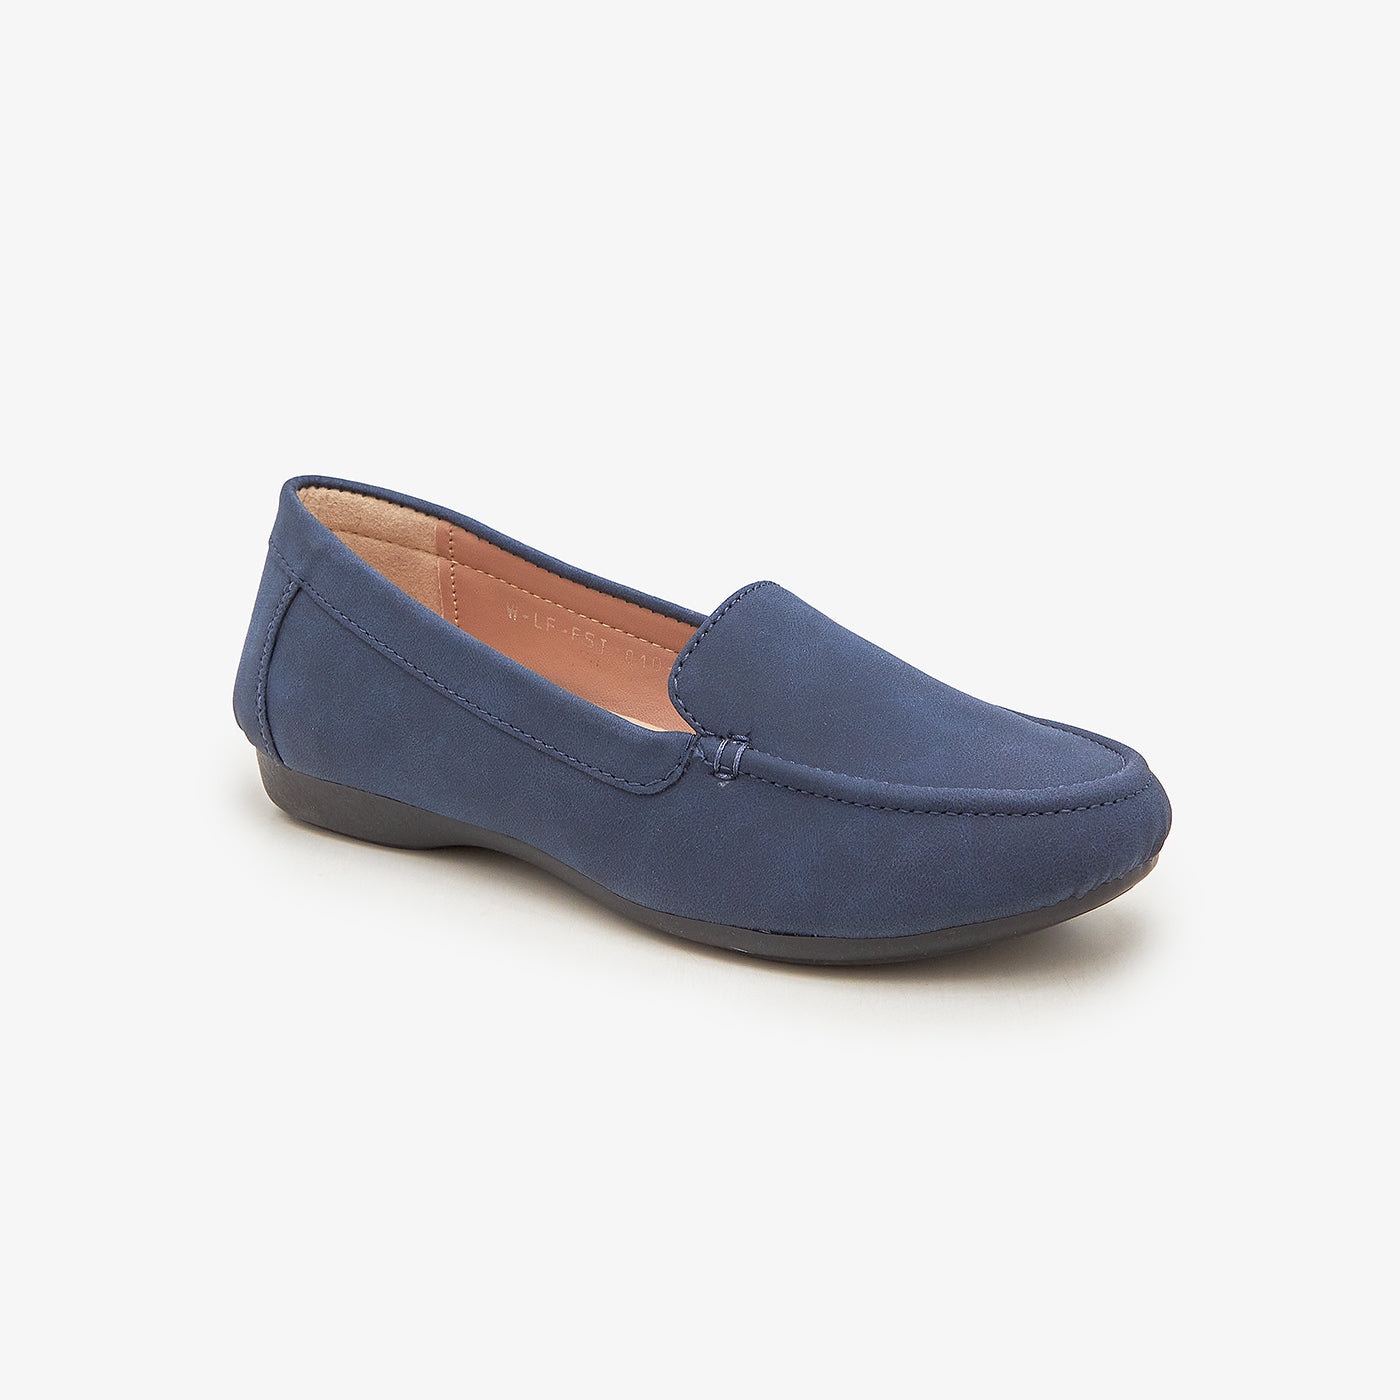 Plain Loafers for Women